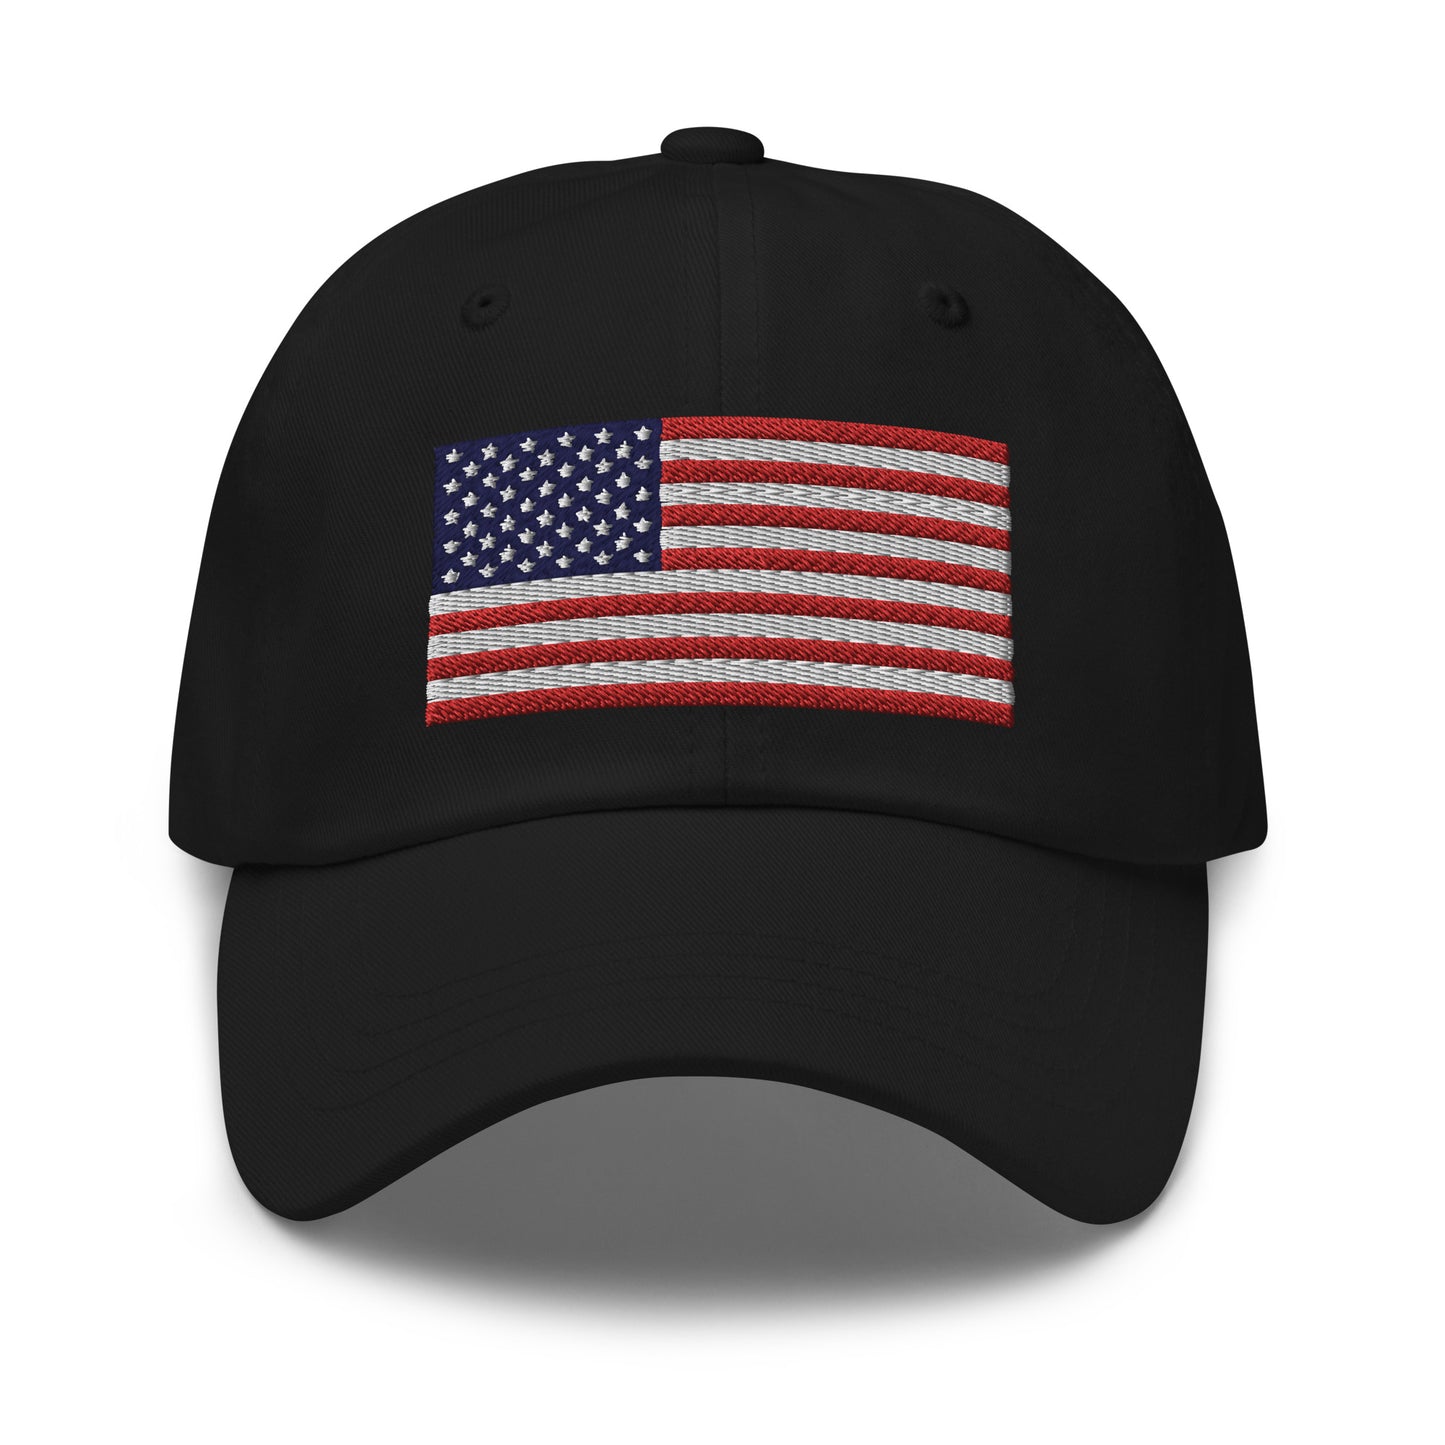 Black dad hat showcasing American spirit with embroidery